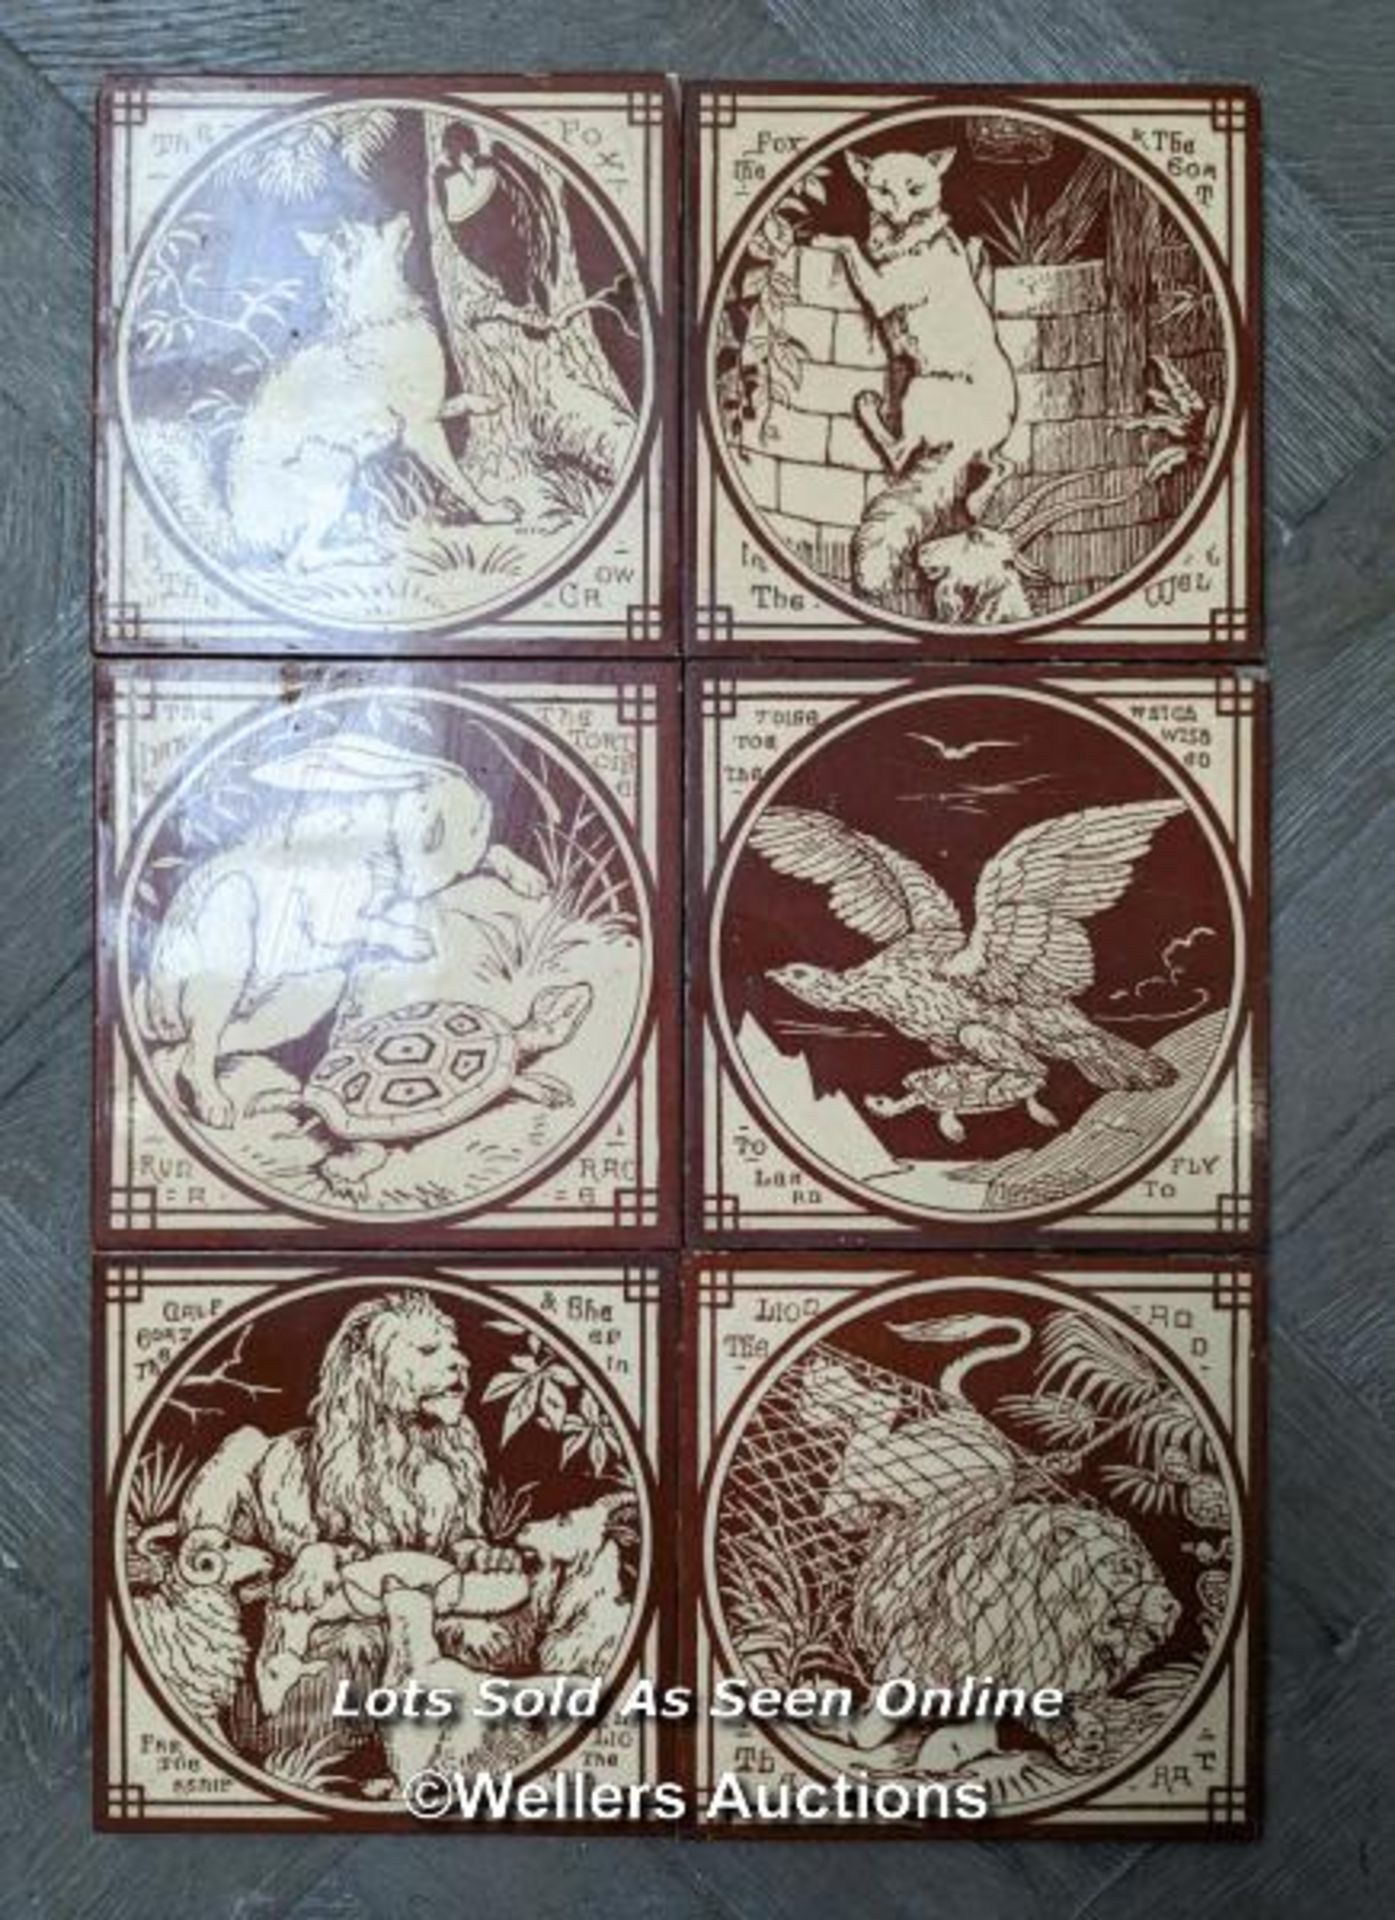 Set of 6 Minton aesop's fables tiles. Possibly designed by J Moyr Smith 1872 to 1875. 6" x 6". Small